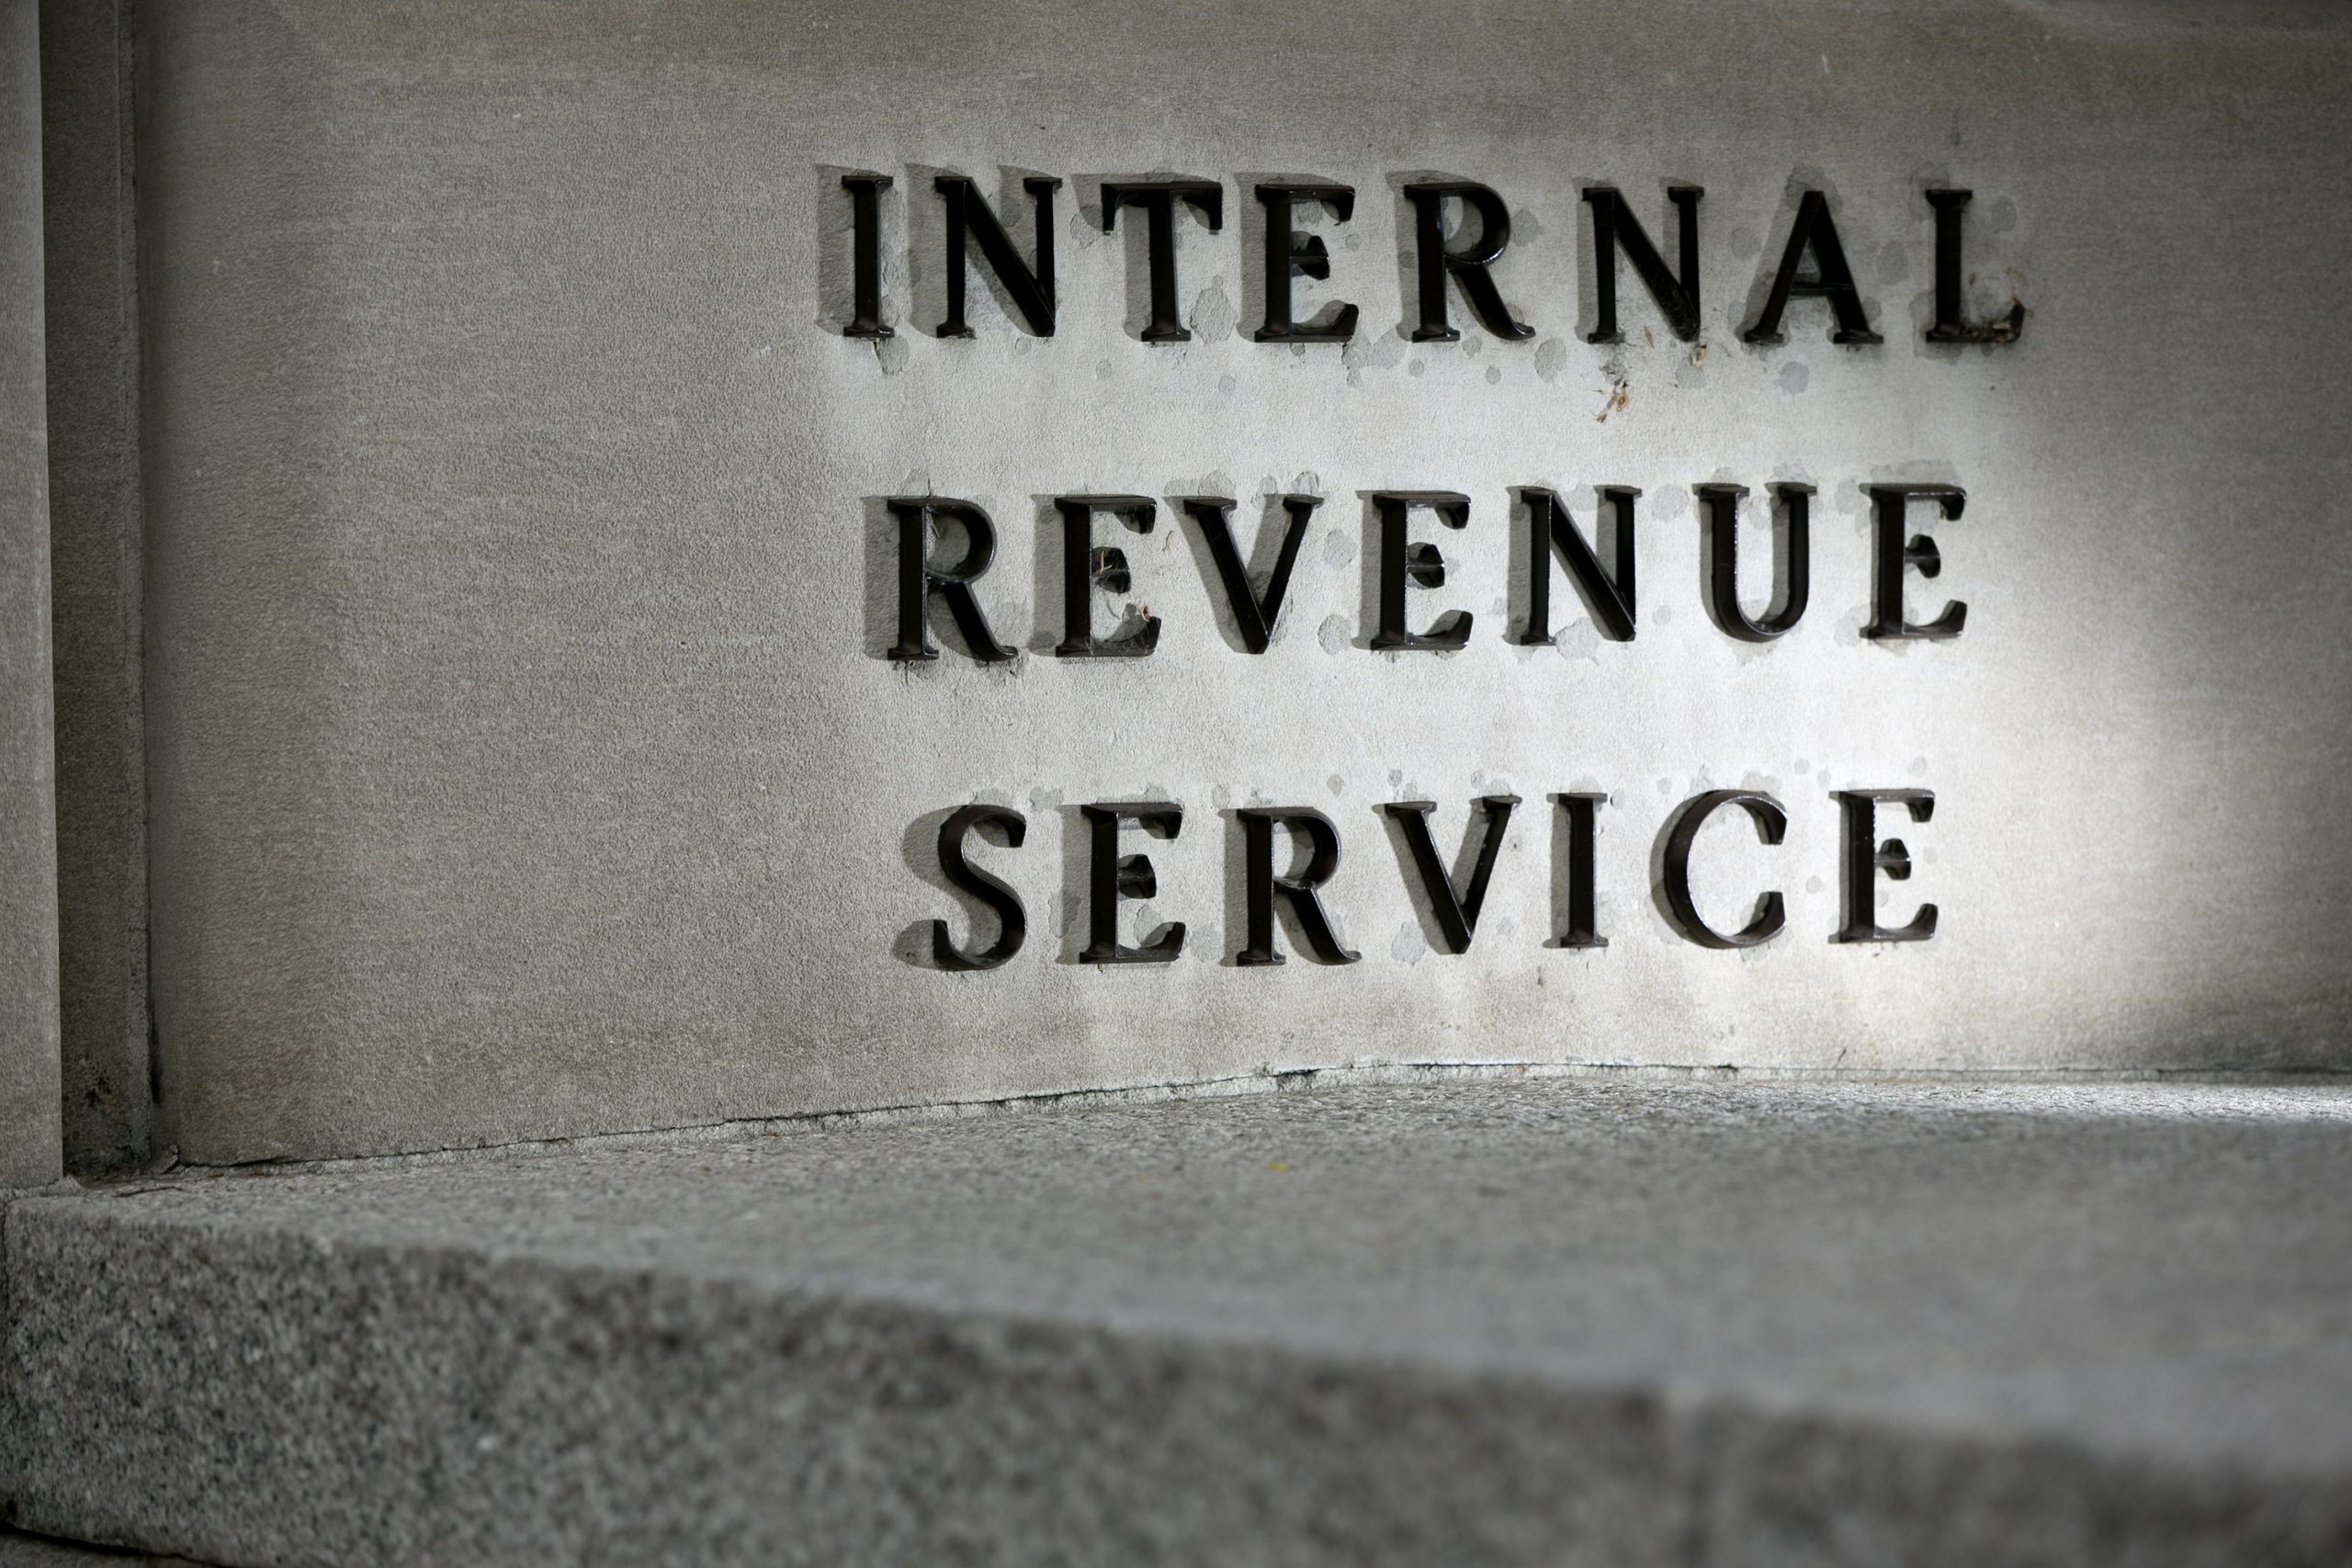 IRS rejects Christian nonprofit’s tax-exempt request because ‘Bible teachings are typically affiliated with the Republican Party’